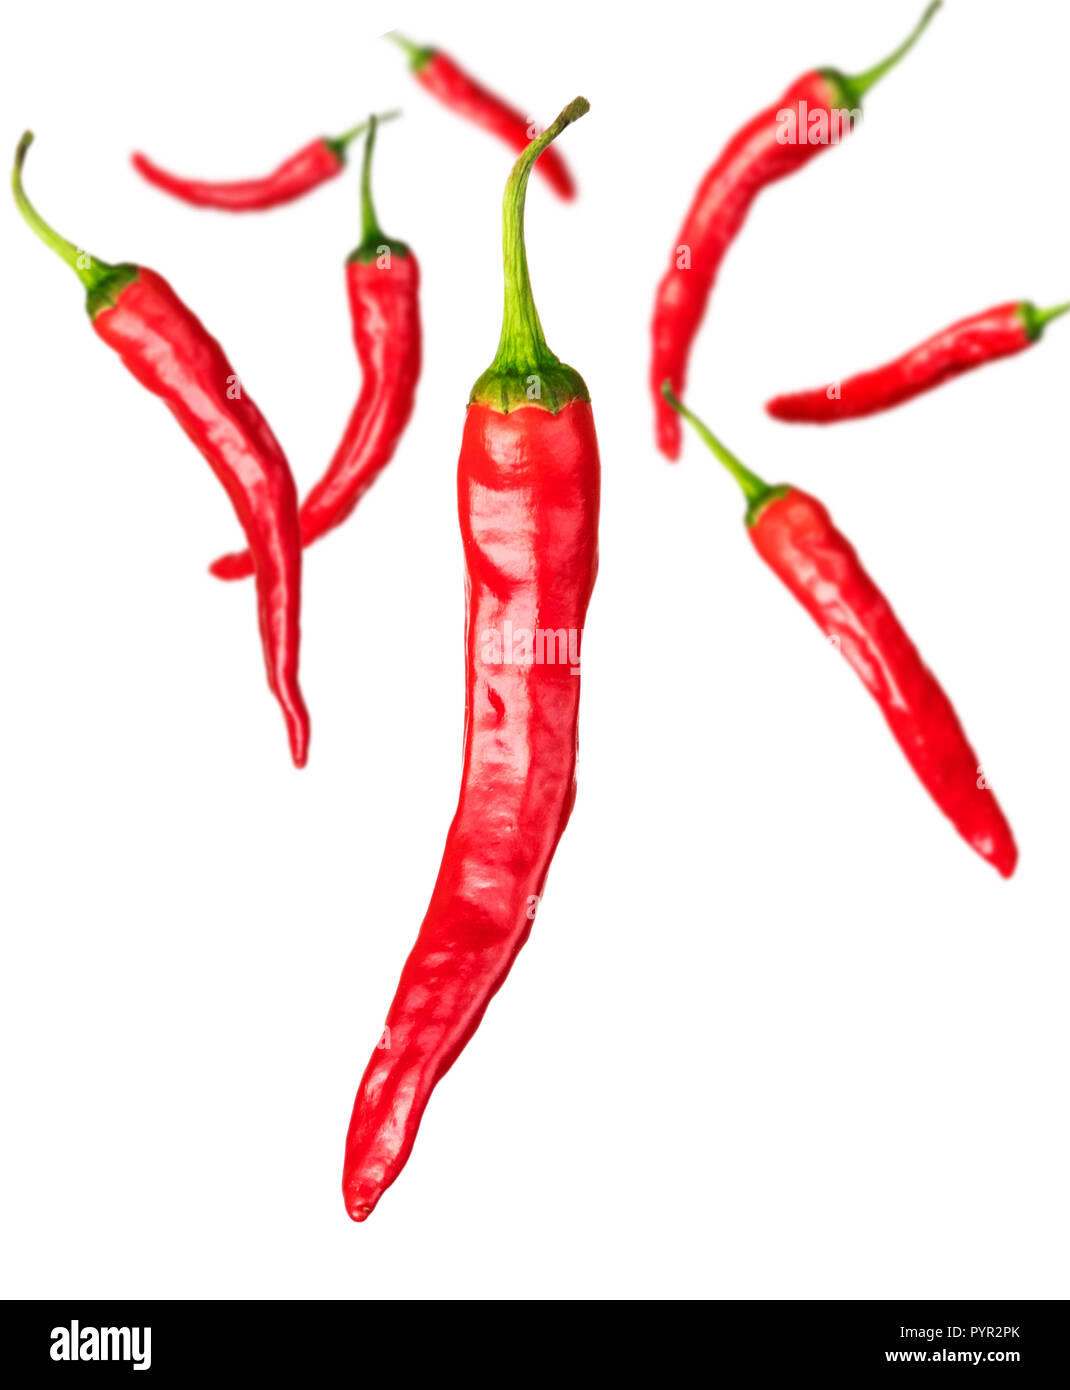 a few pieces of red chili peppers isolated on white background Stock Photo